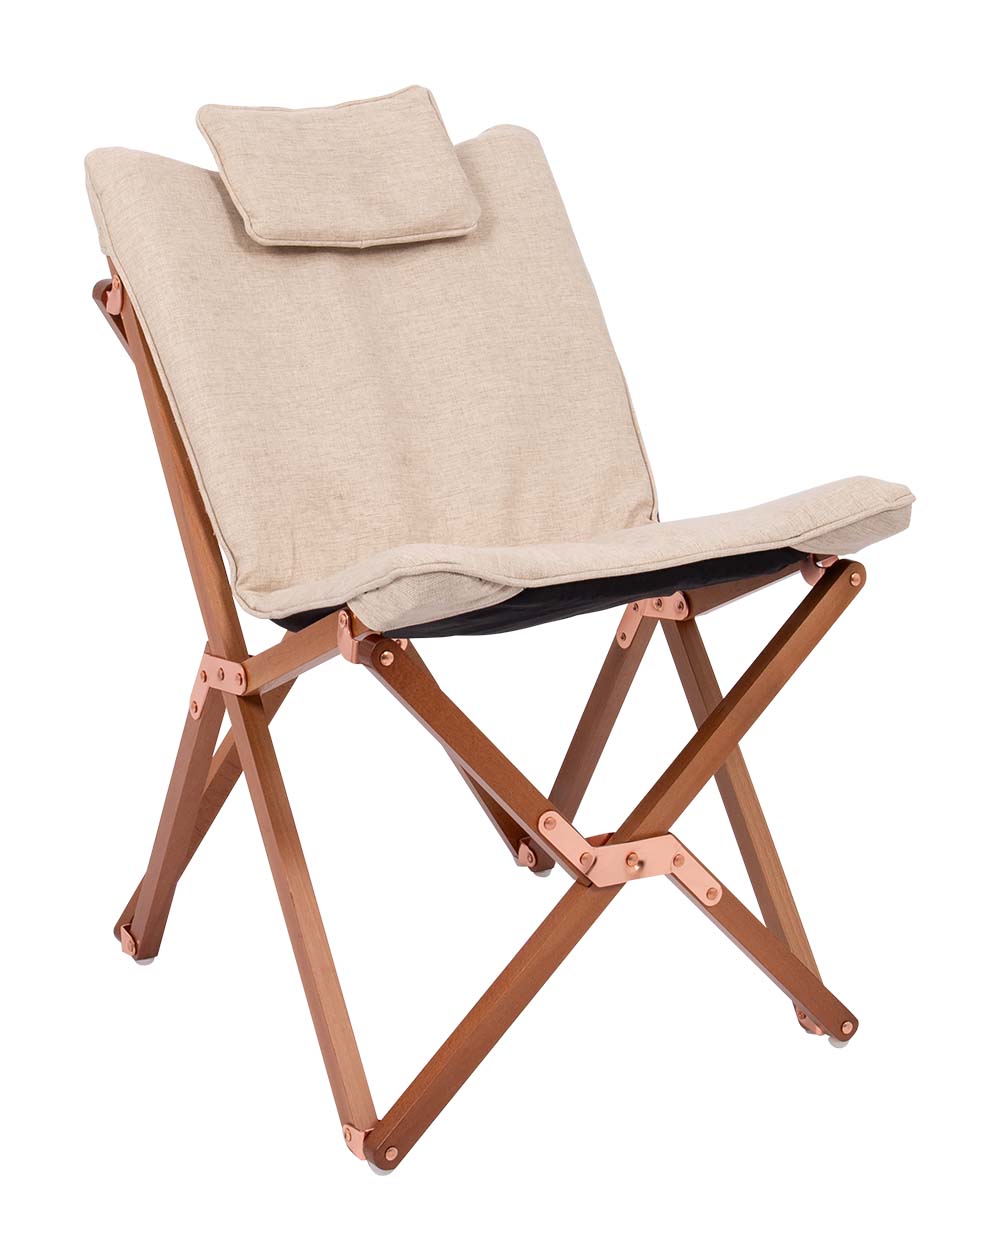 1200349 Bo-Camp - Urban Outdoor collection - Relaxstoel - Bloomsbury - S - Oxford polyester - Beige